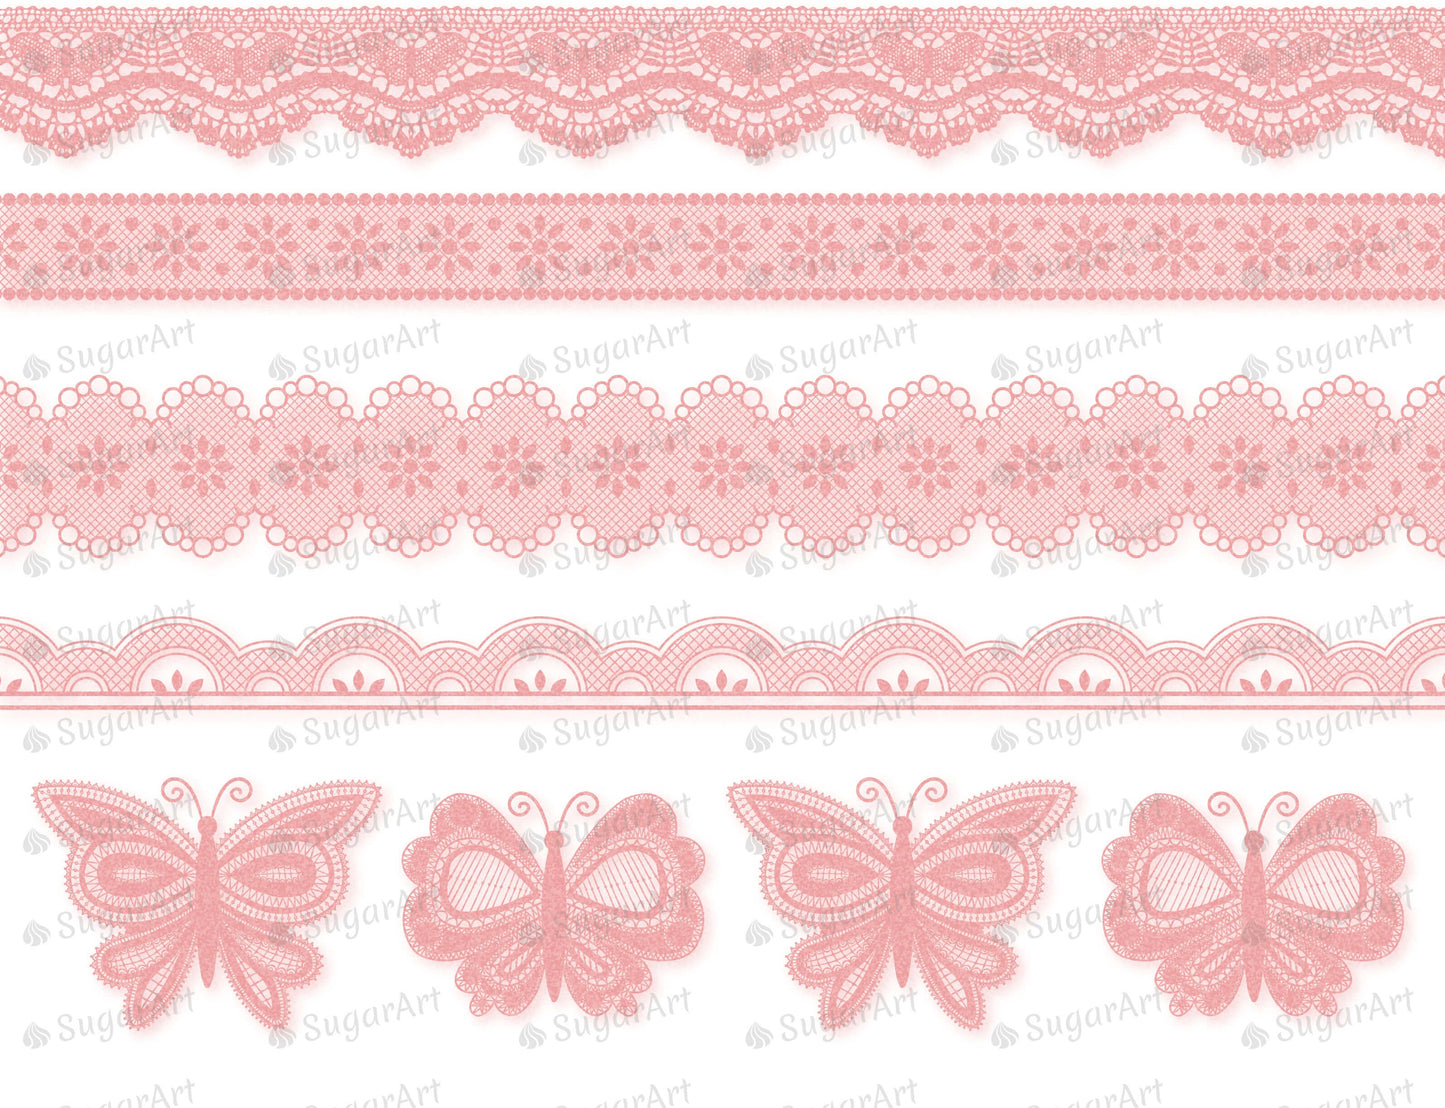 Dusty Rose Lace Borders and Butterflies - Edible Fabric - EF015.